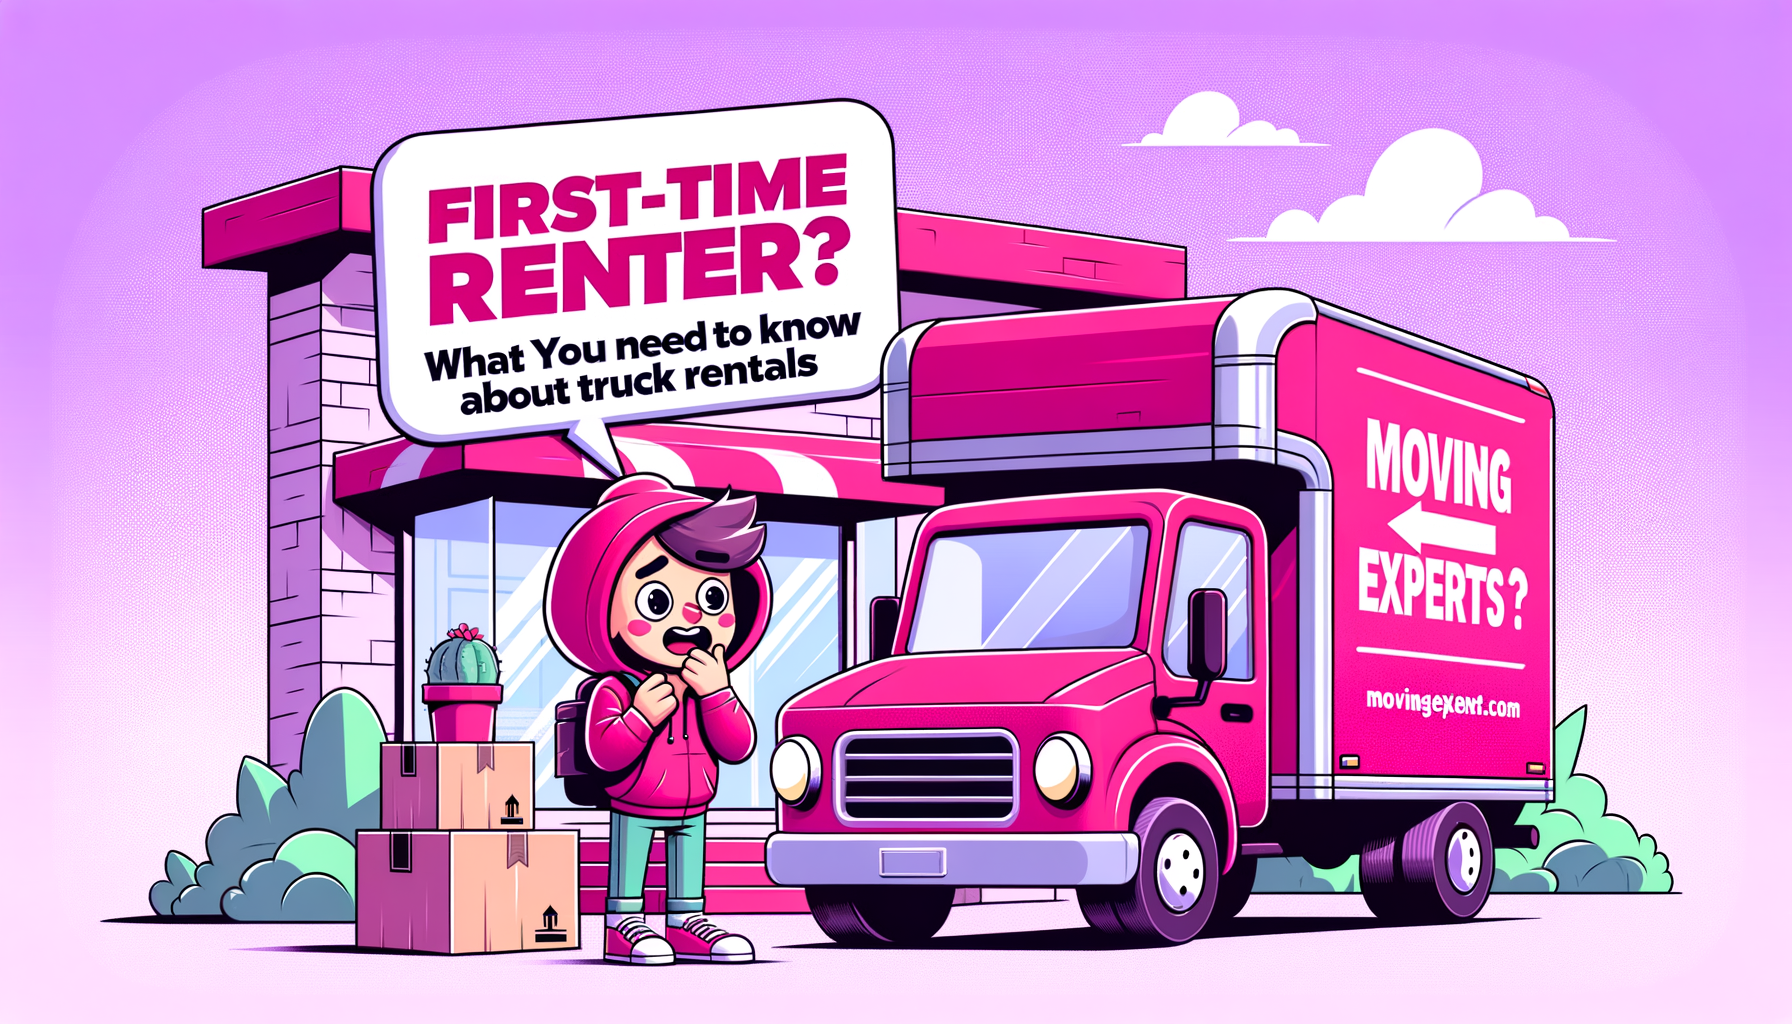 Cartoon-style fuschia Penske rental truck with smiling first-time renters learning how to use it, embodying key insights for a smooth moving experience.